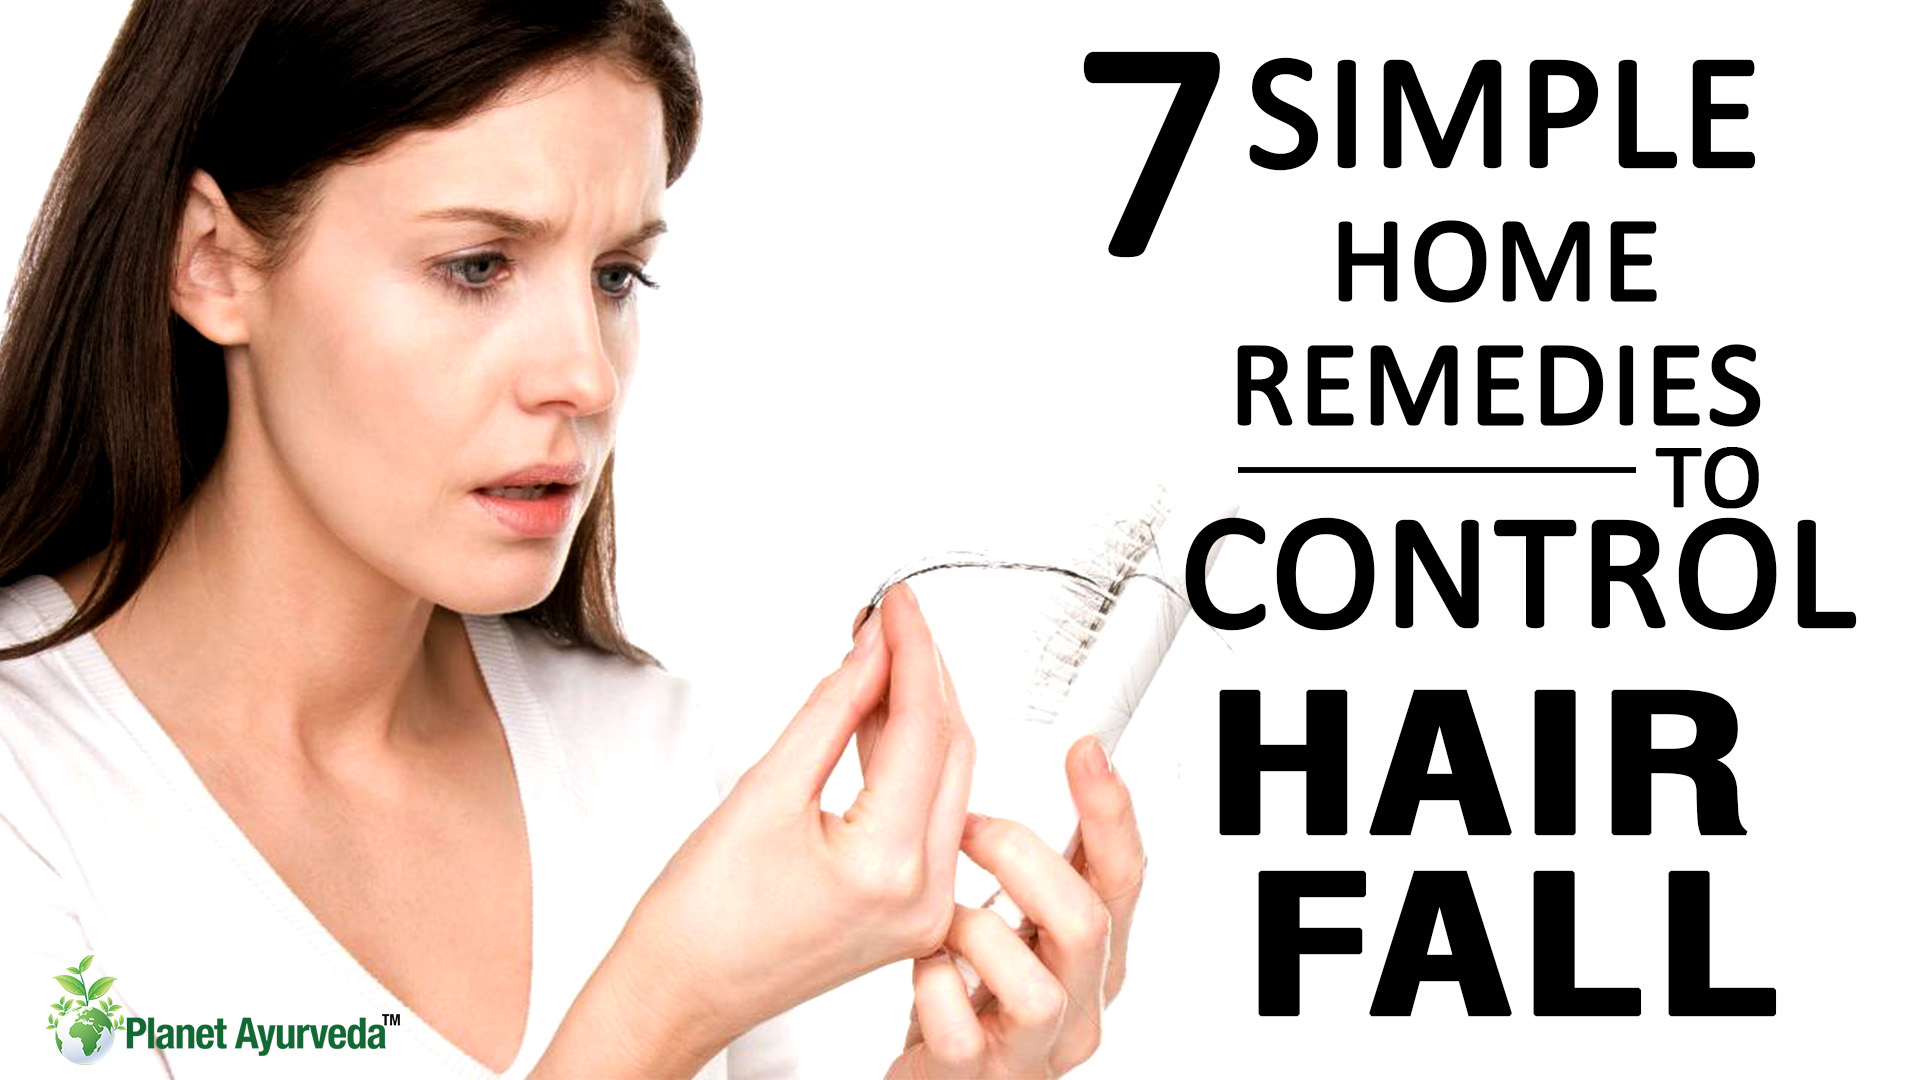 7 Simple Home Remedies to Control Hair Fall